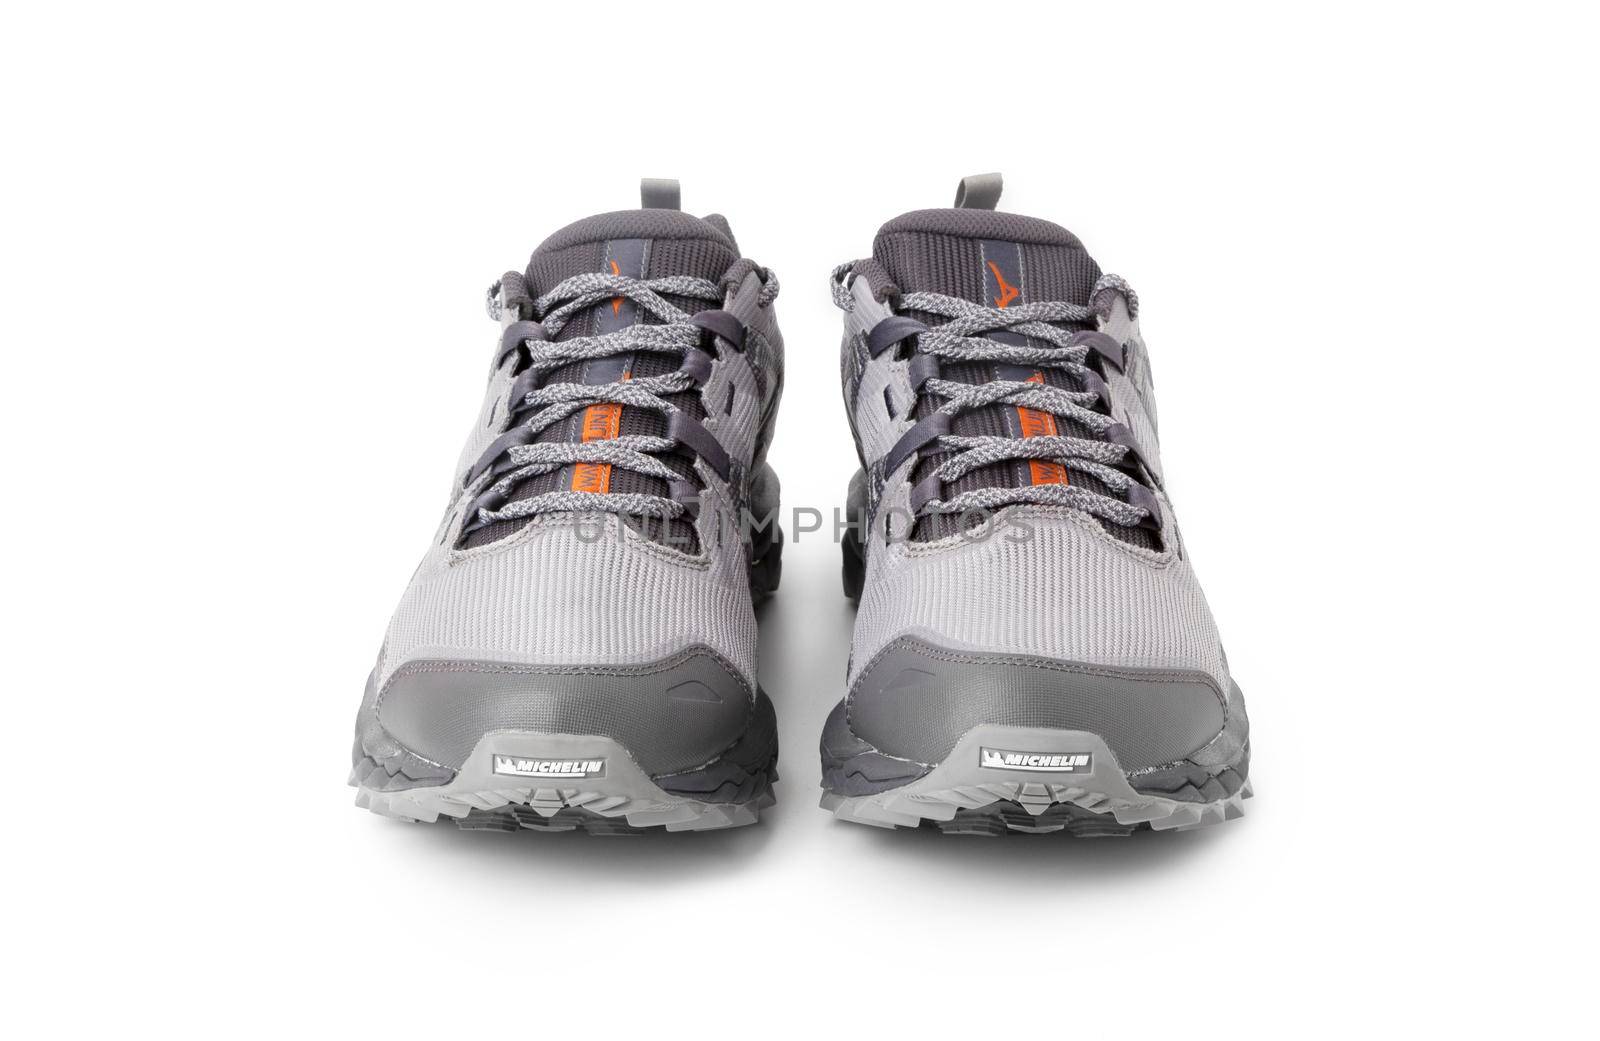 Mizuno Wave Mujin 6 Trail running sneakers close up isolated on a white background by SlayCer